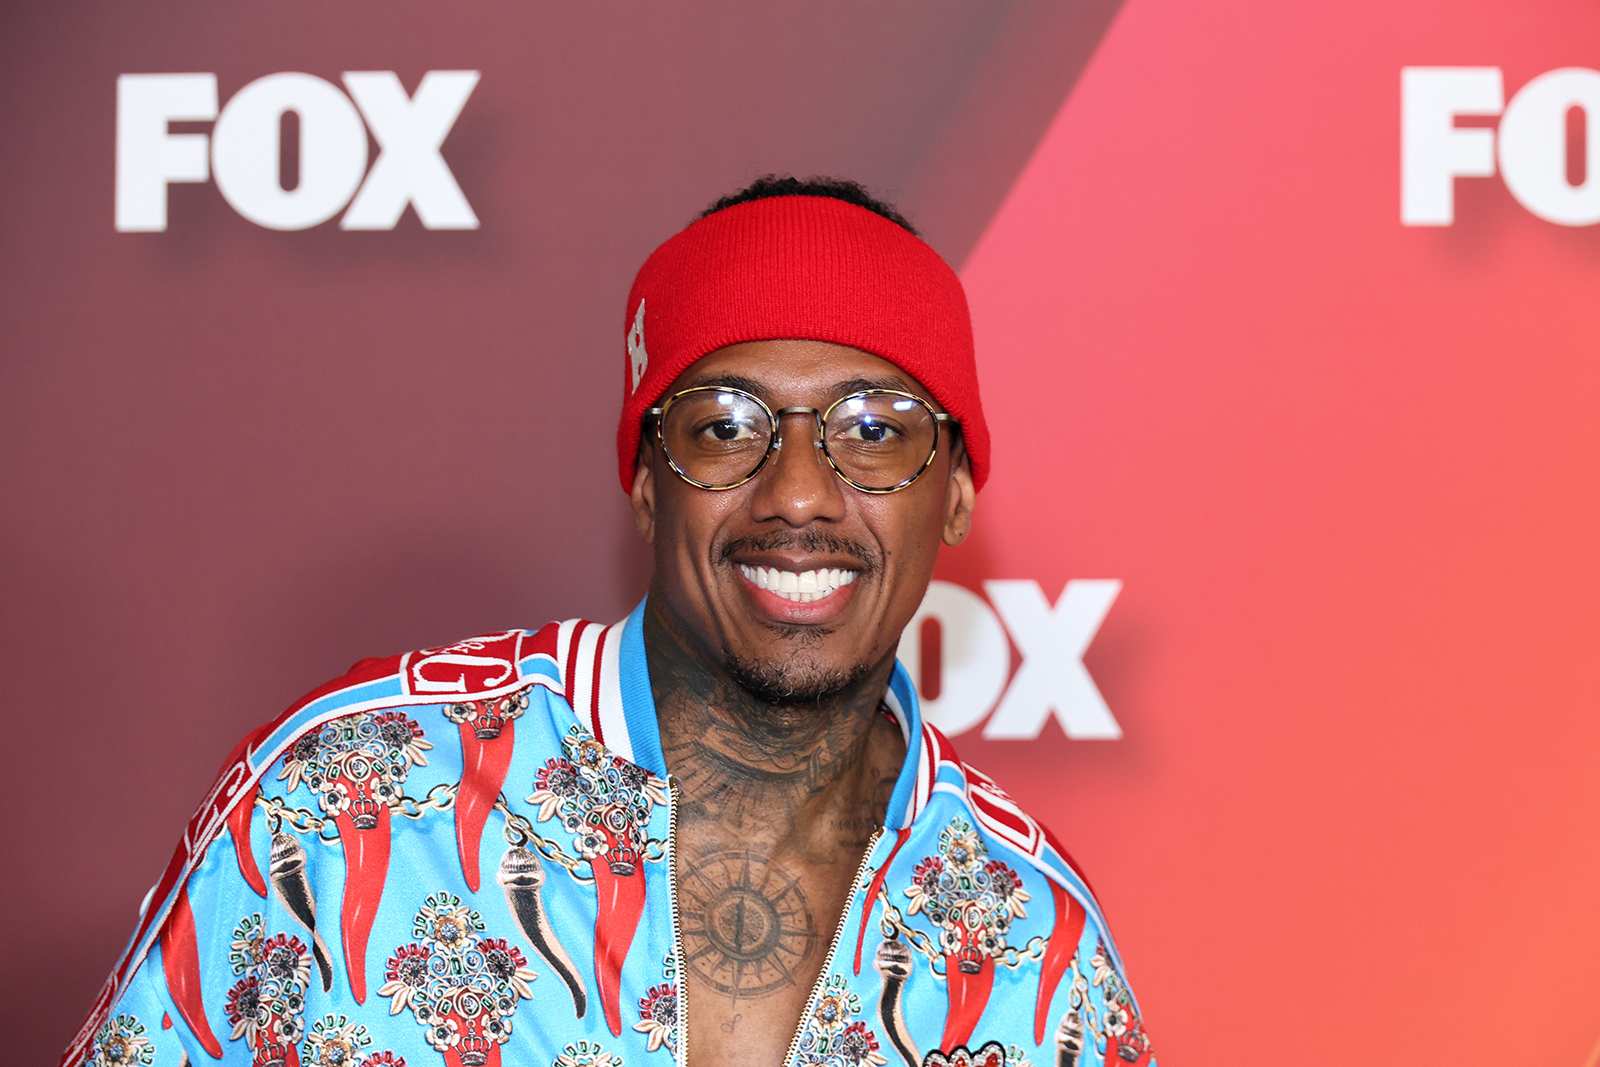 Nick Cannon explains why he insured his testicles for $10 million: 'My most valuable assets'